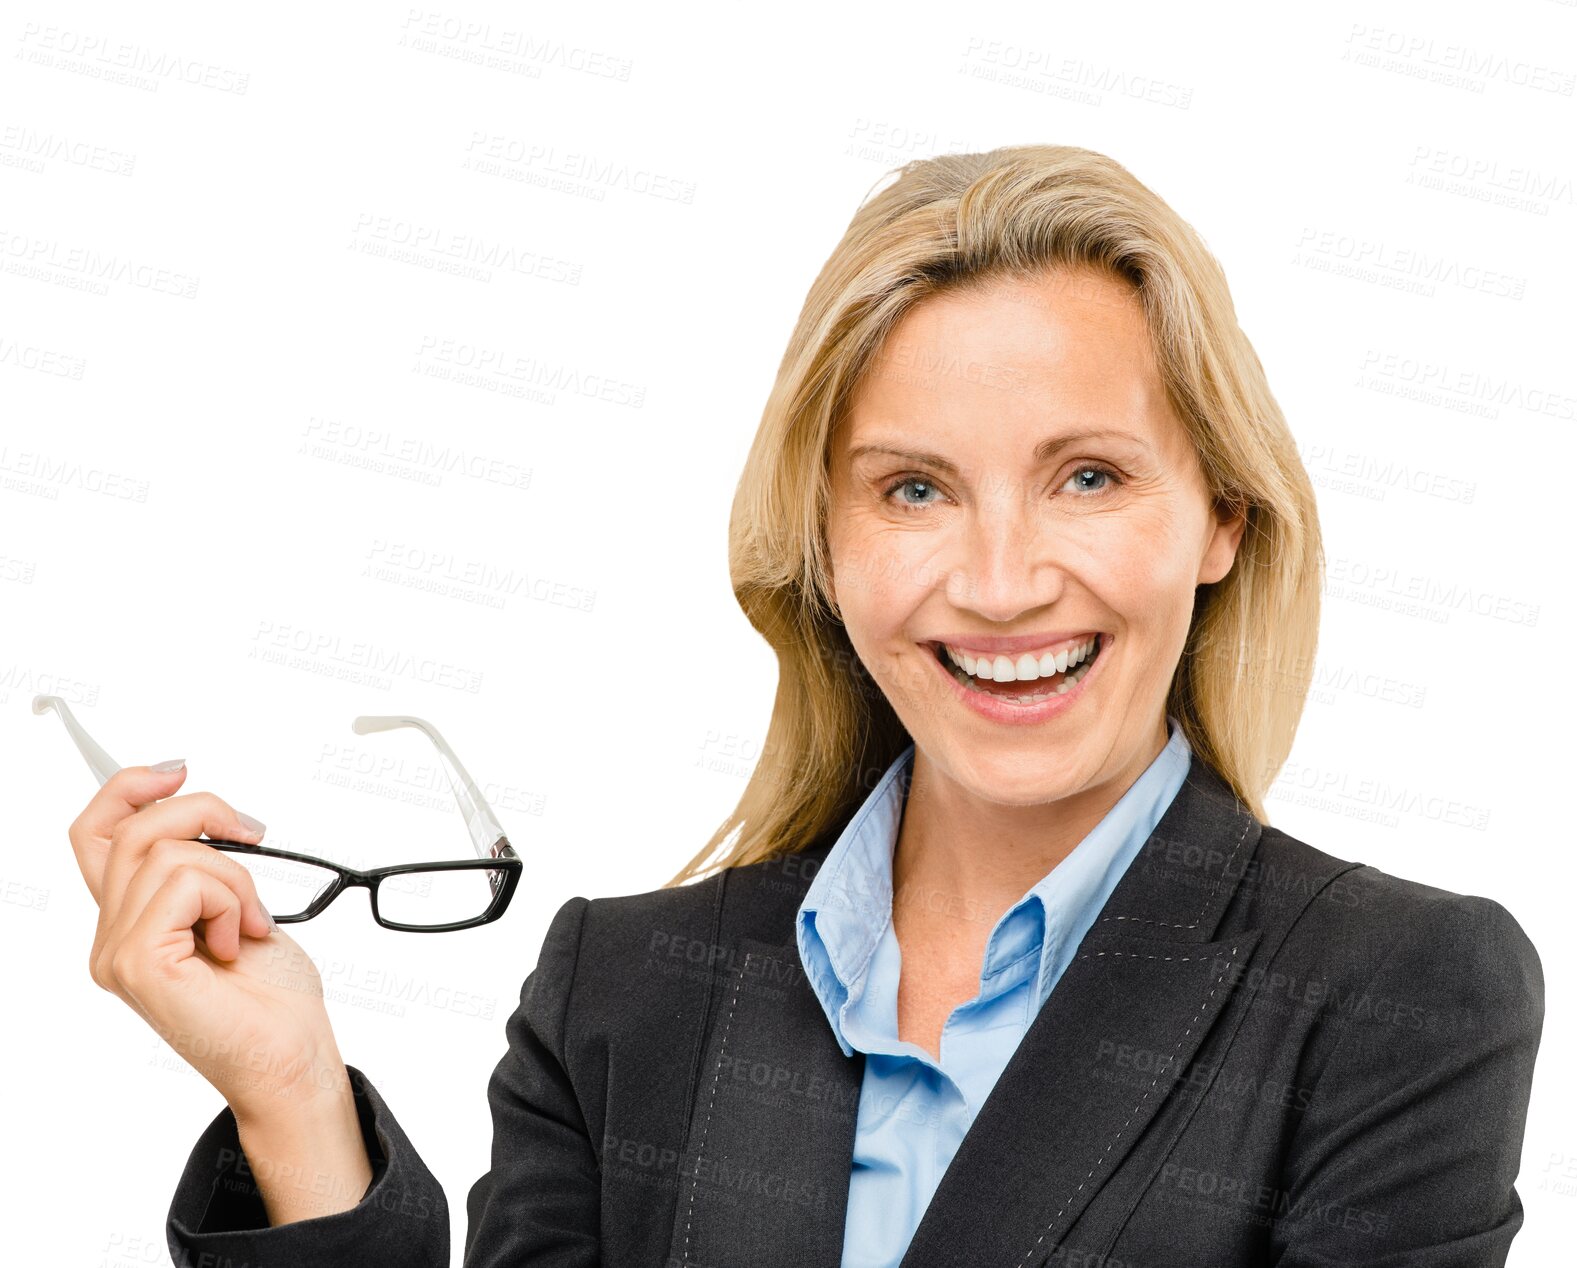 Buy stock photo Portrait, smile and glasses with business woman isolated on transparent background for management. Face, happy or excited with confident mature CEO, executive or manager on PNG for corporate career